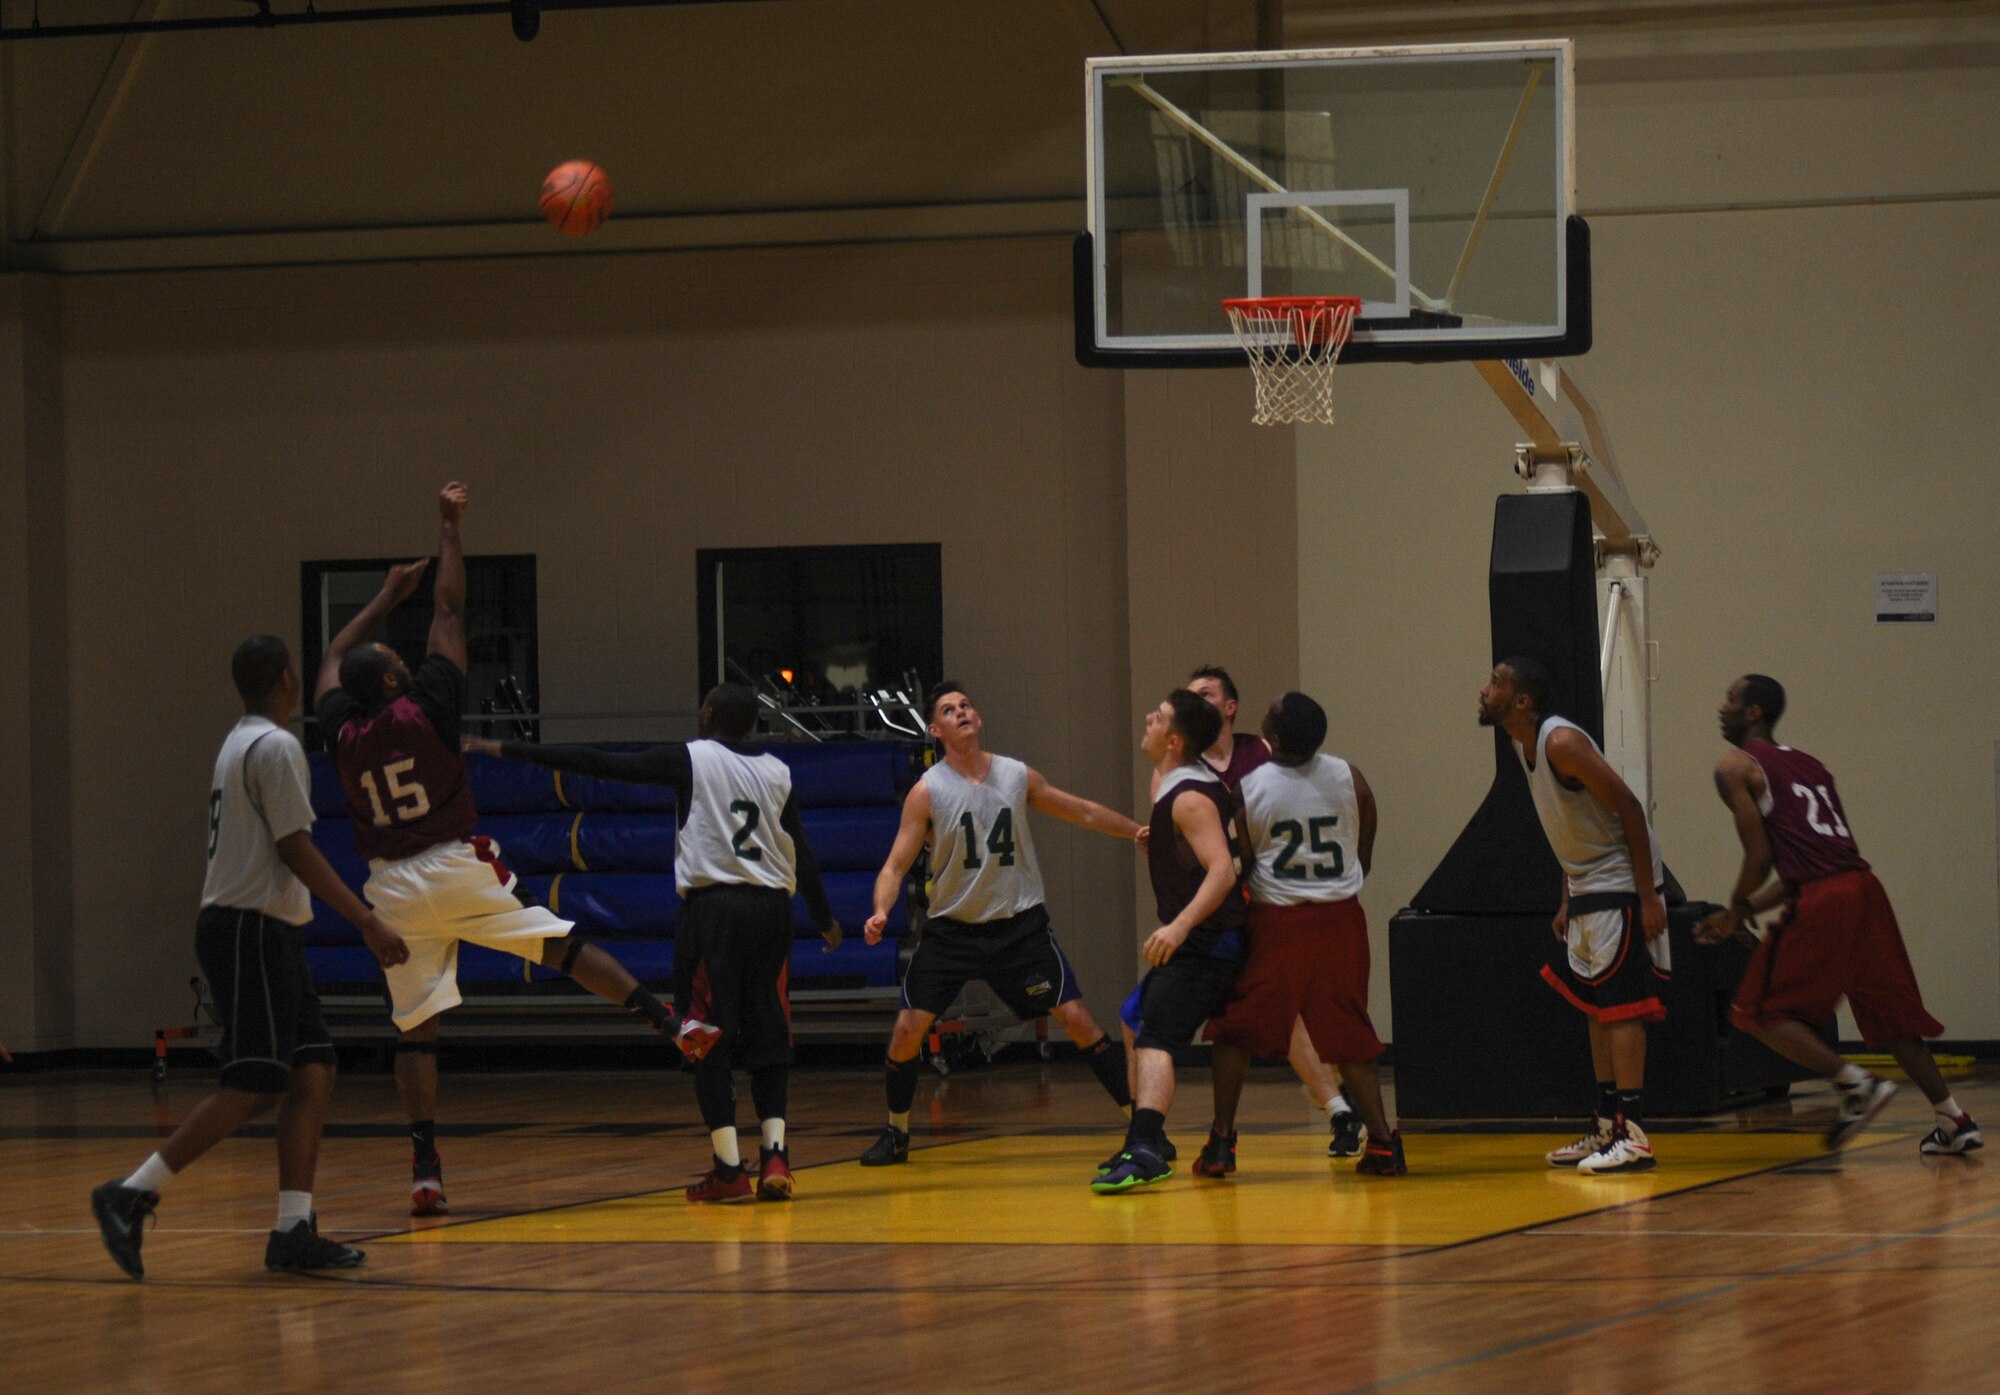 A member of the 19th Maintenance Squadron puts up a shot while playing against the 19th Logistics Readiness Squadron team 1 Feb. 10, 2015, at Little Rock Air Force Base, Ark. The final score was 65-45, 19th LRS. (U.S. Air Force photo by Airman 1st Class Harry Brexel)